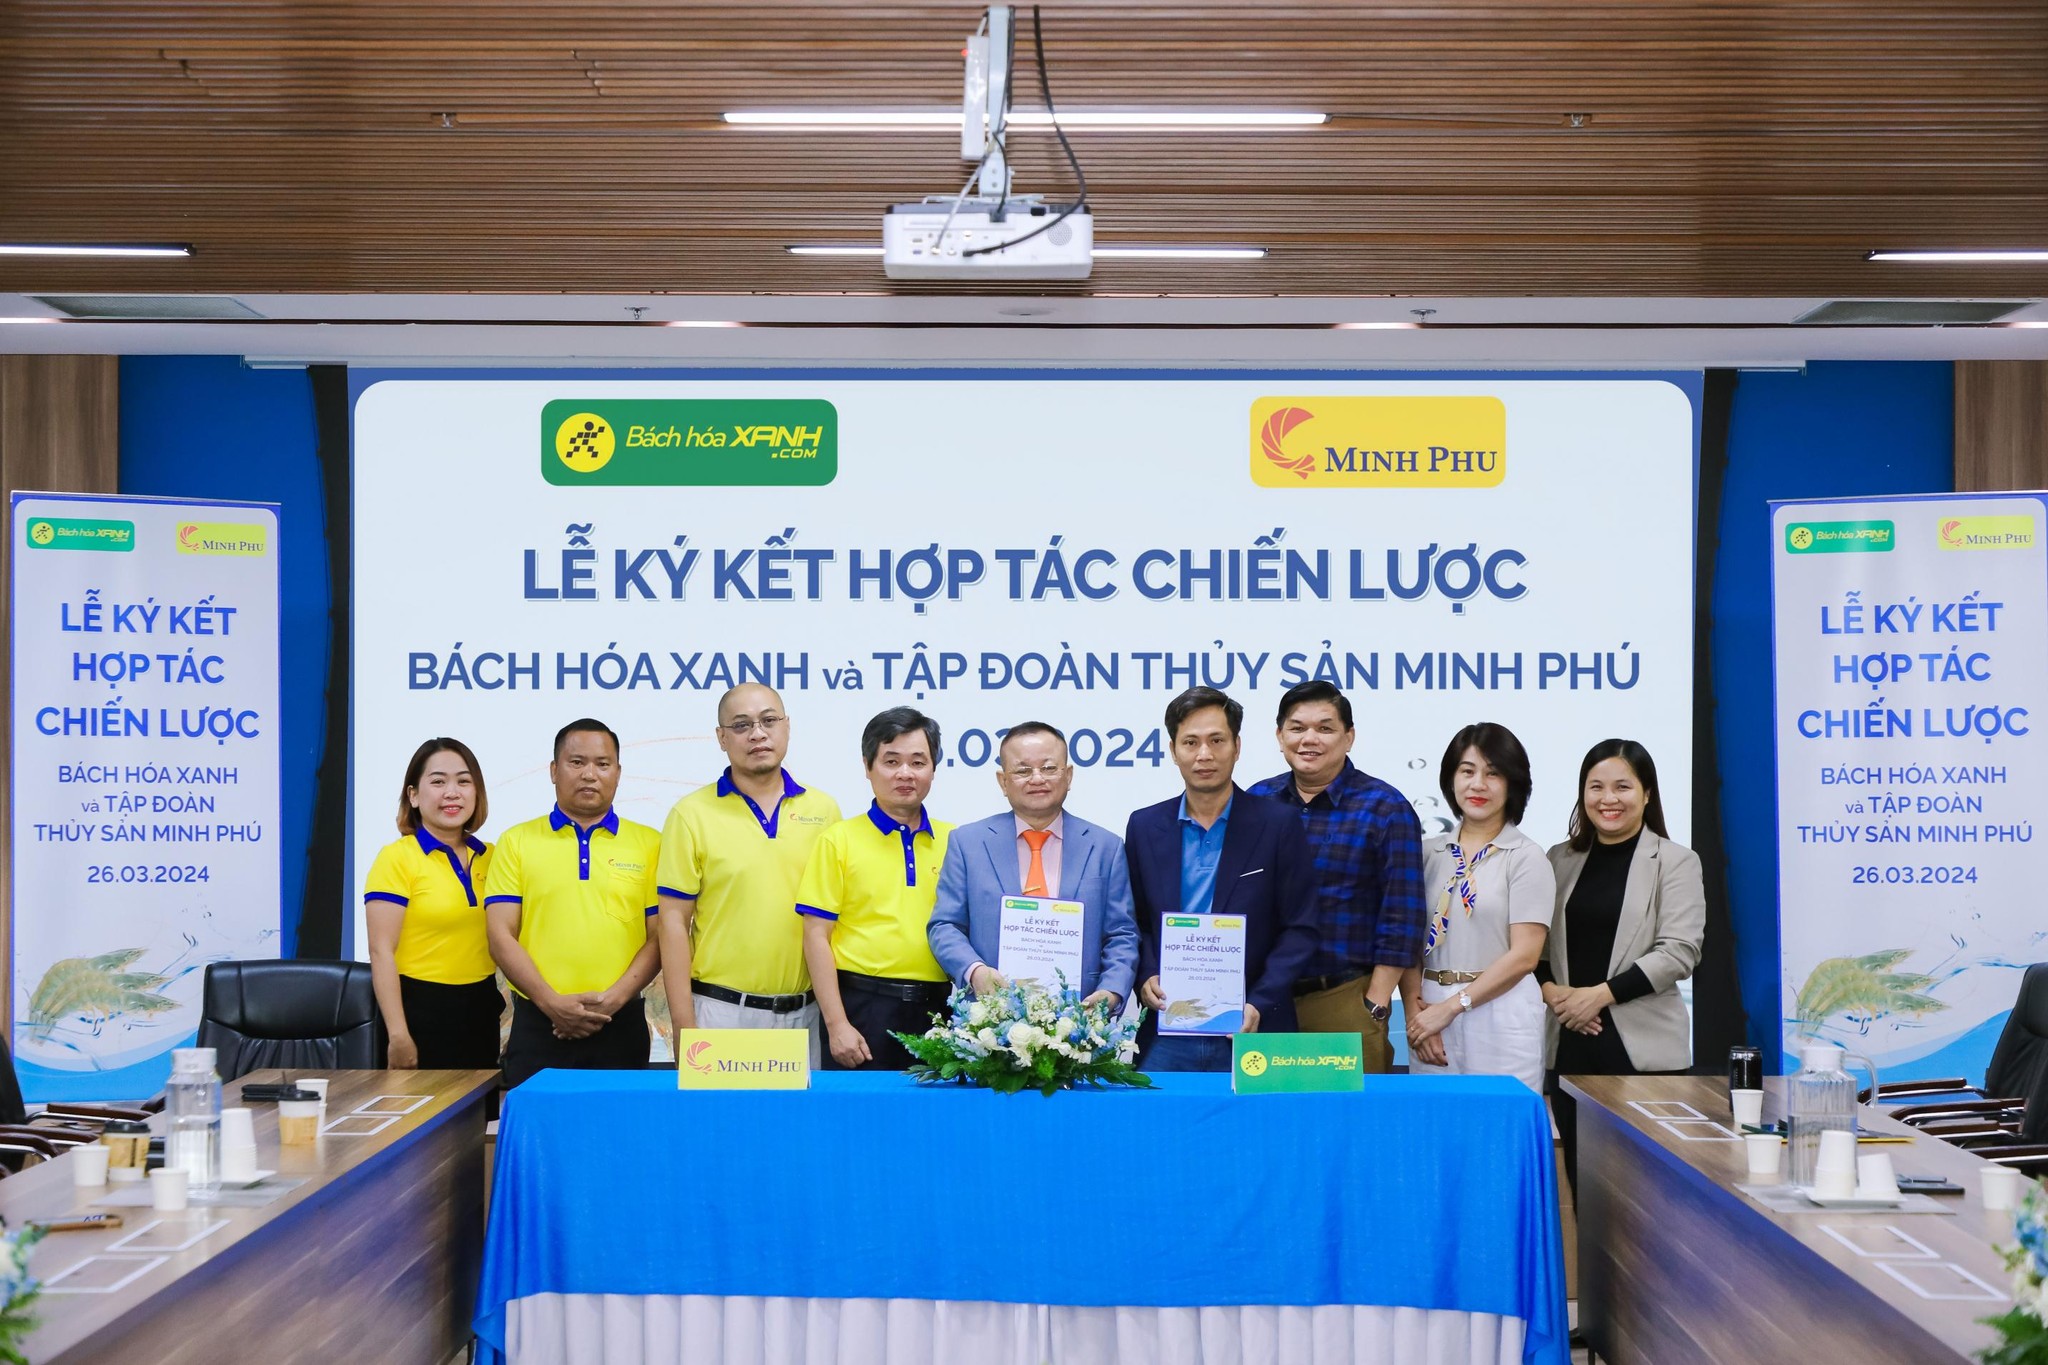 Bach Hoa Xanh signs a strategic partnership with Minh Phu Seafood Corp to distribute export-standard shrimp at all Bach Hoa Xanh stores